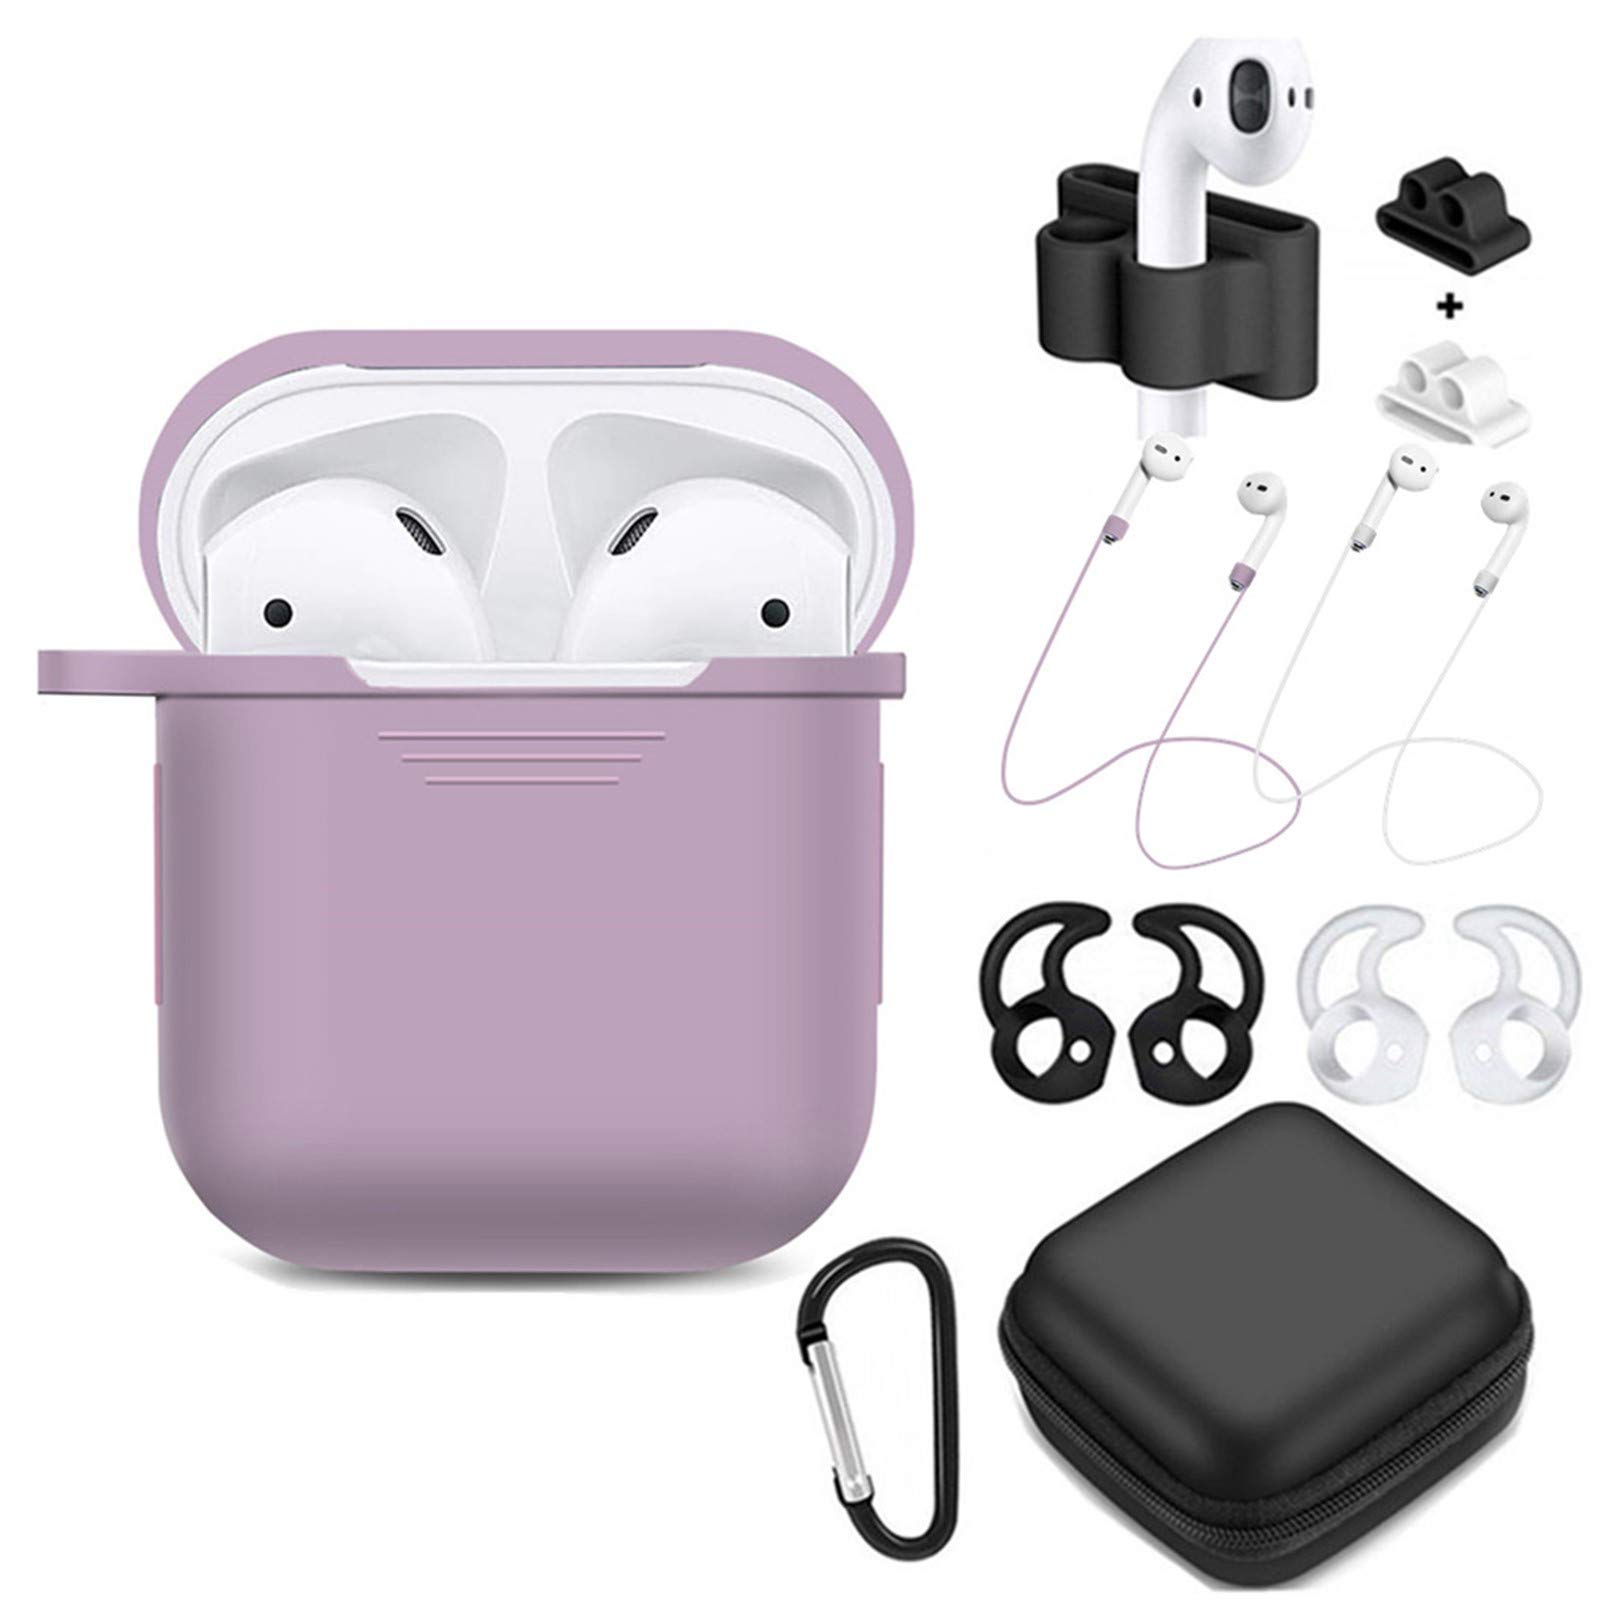 Book Cover TAOSANHU AirPods Case 9 in 1 Airpods Accessories Kits Protective Silicone Cover and Skin Compatible Apple Airpods 1 Charging Case with Airpods Ear Hook/Tips/Airpods Strap/Clips/Watch Band Holder